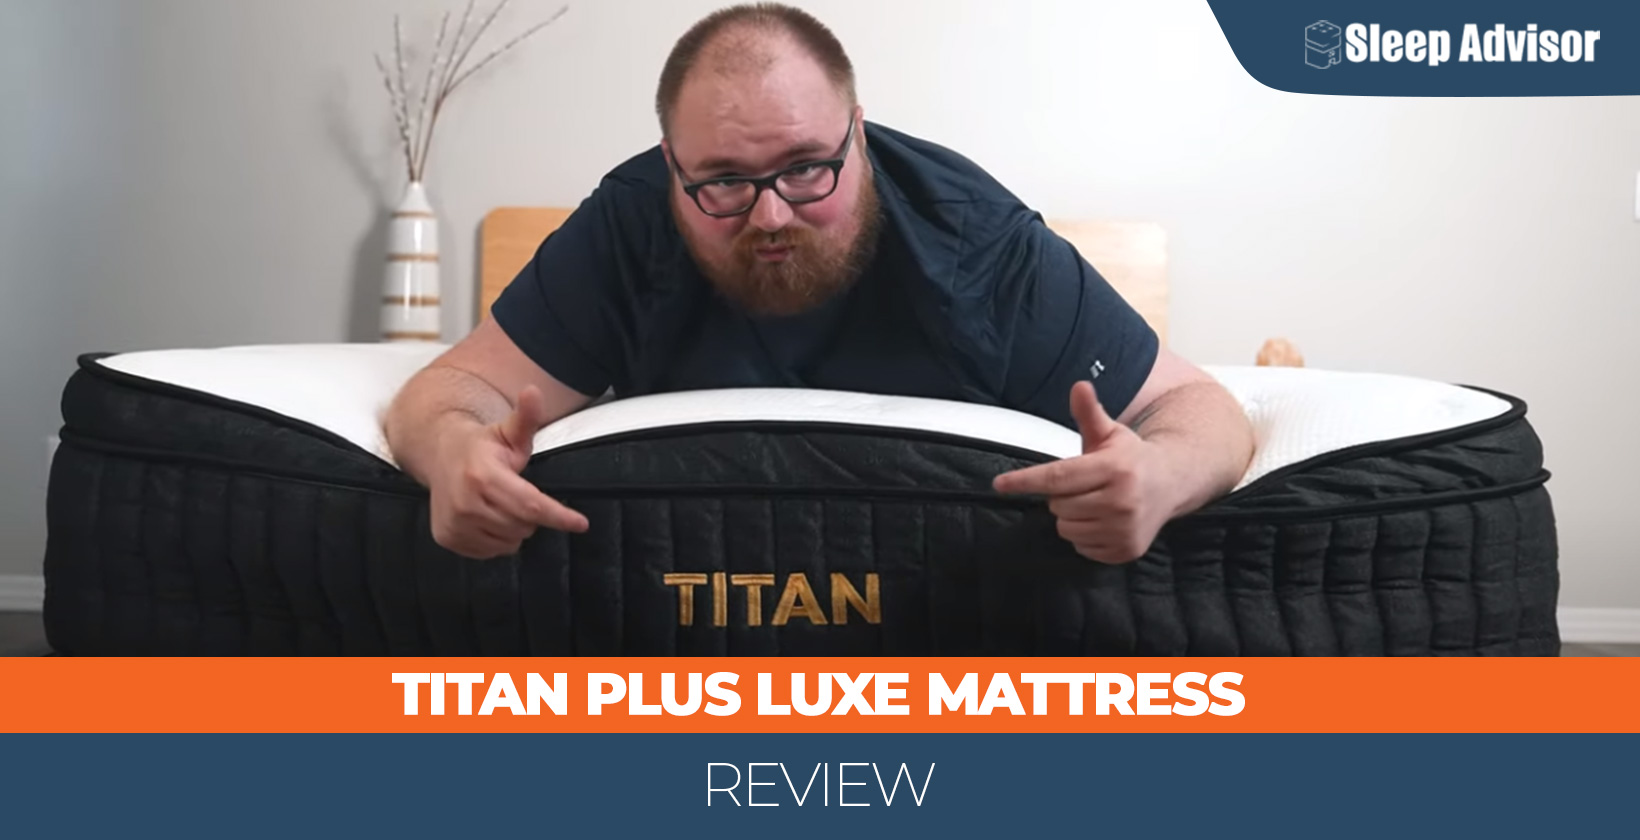 Our in depth Titan Plus Luxe Mattress overview